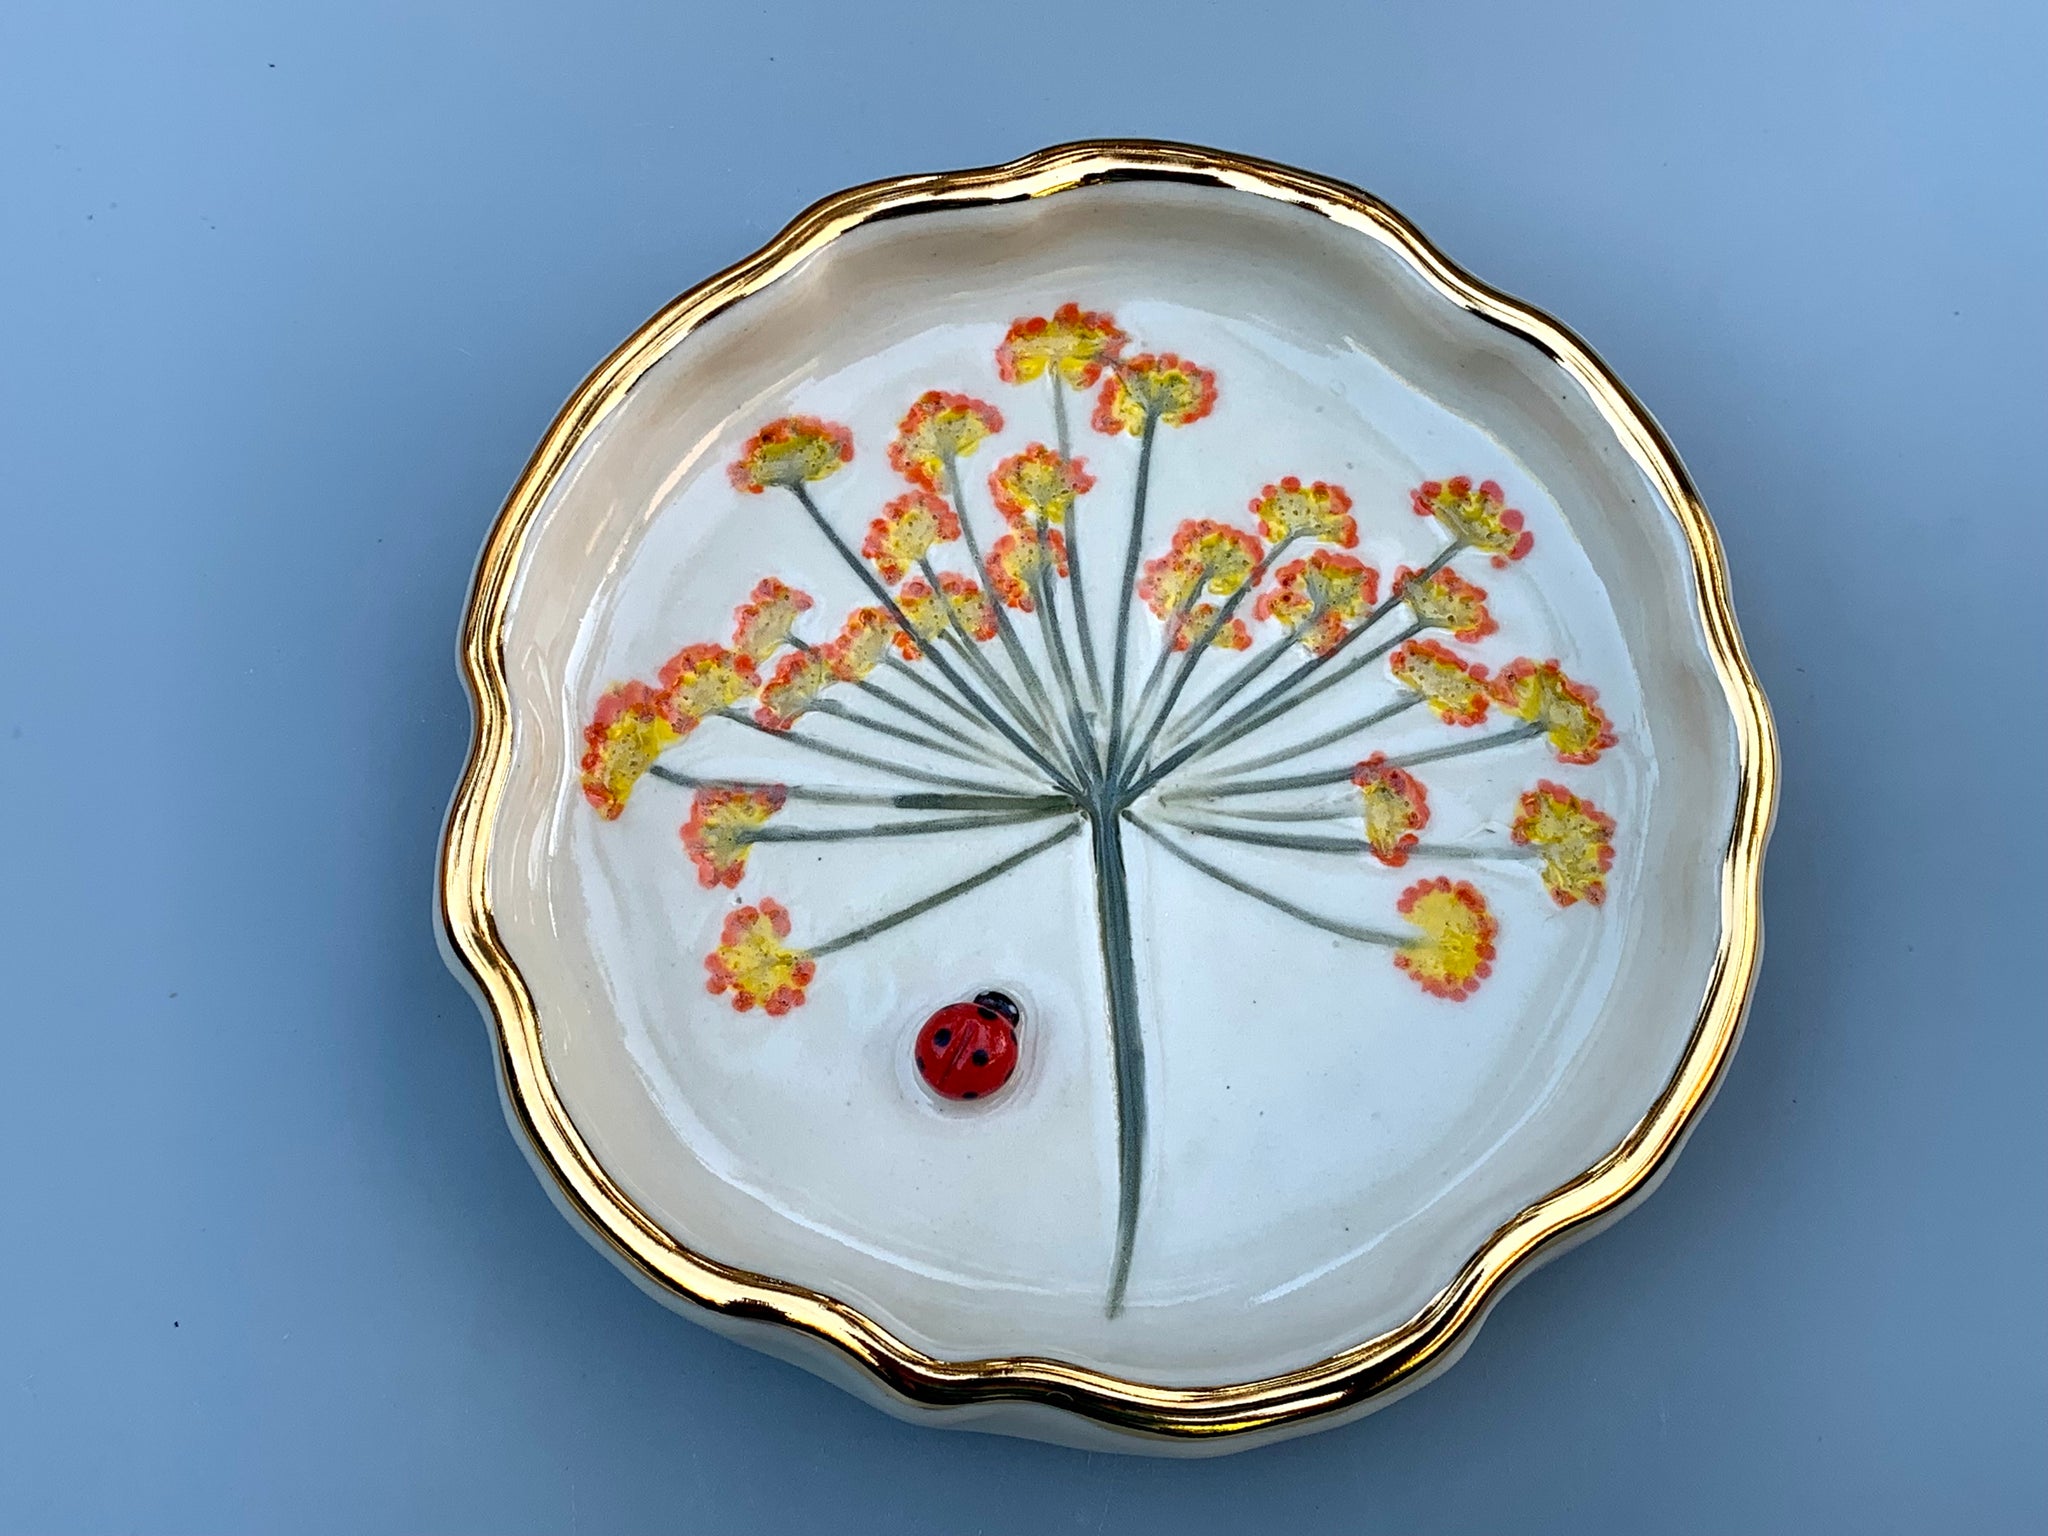 Ladybug Jewelry Dish with Fennel Flowers and Gold Accent - Vuvu Ceramics